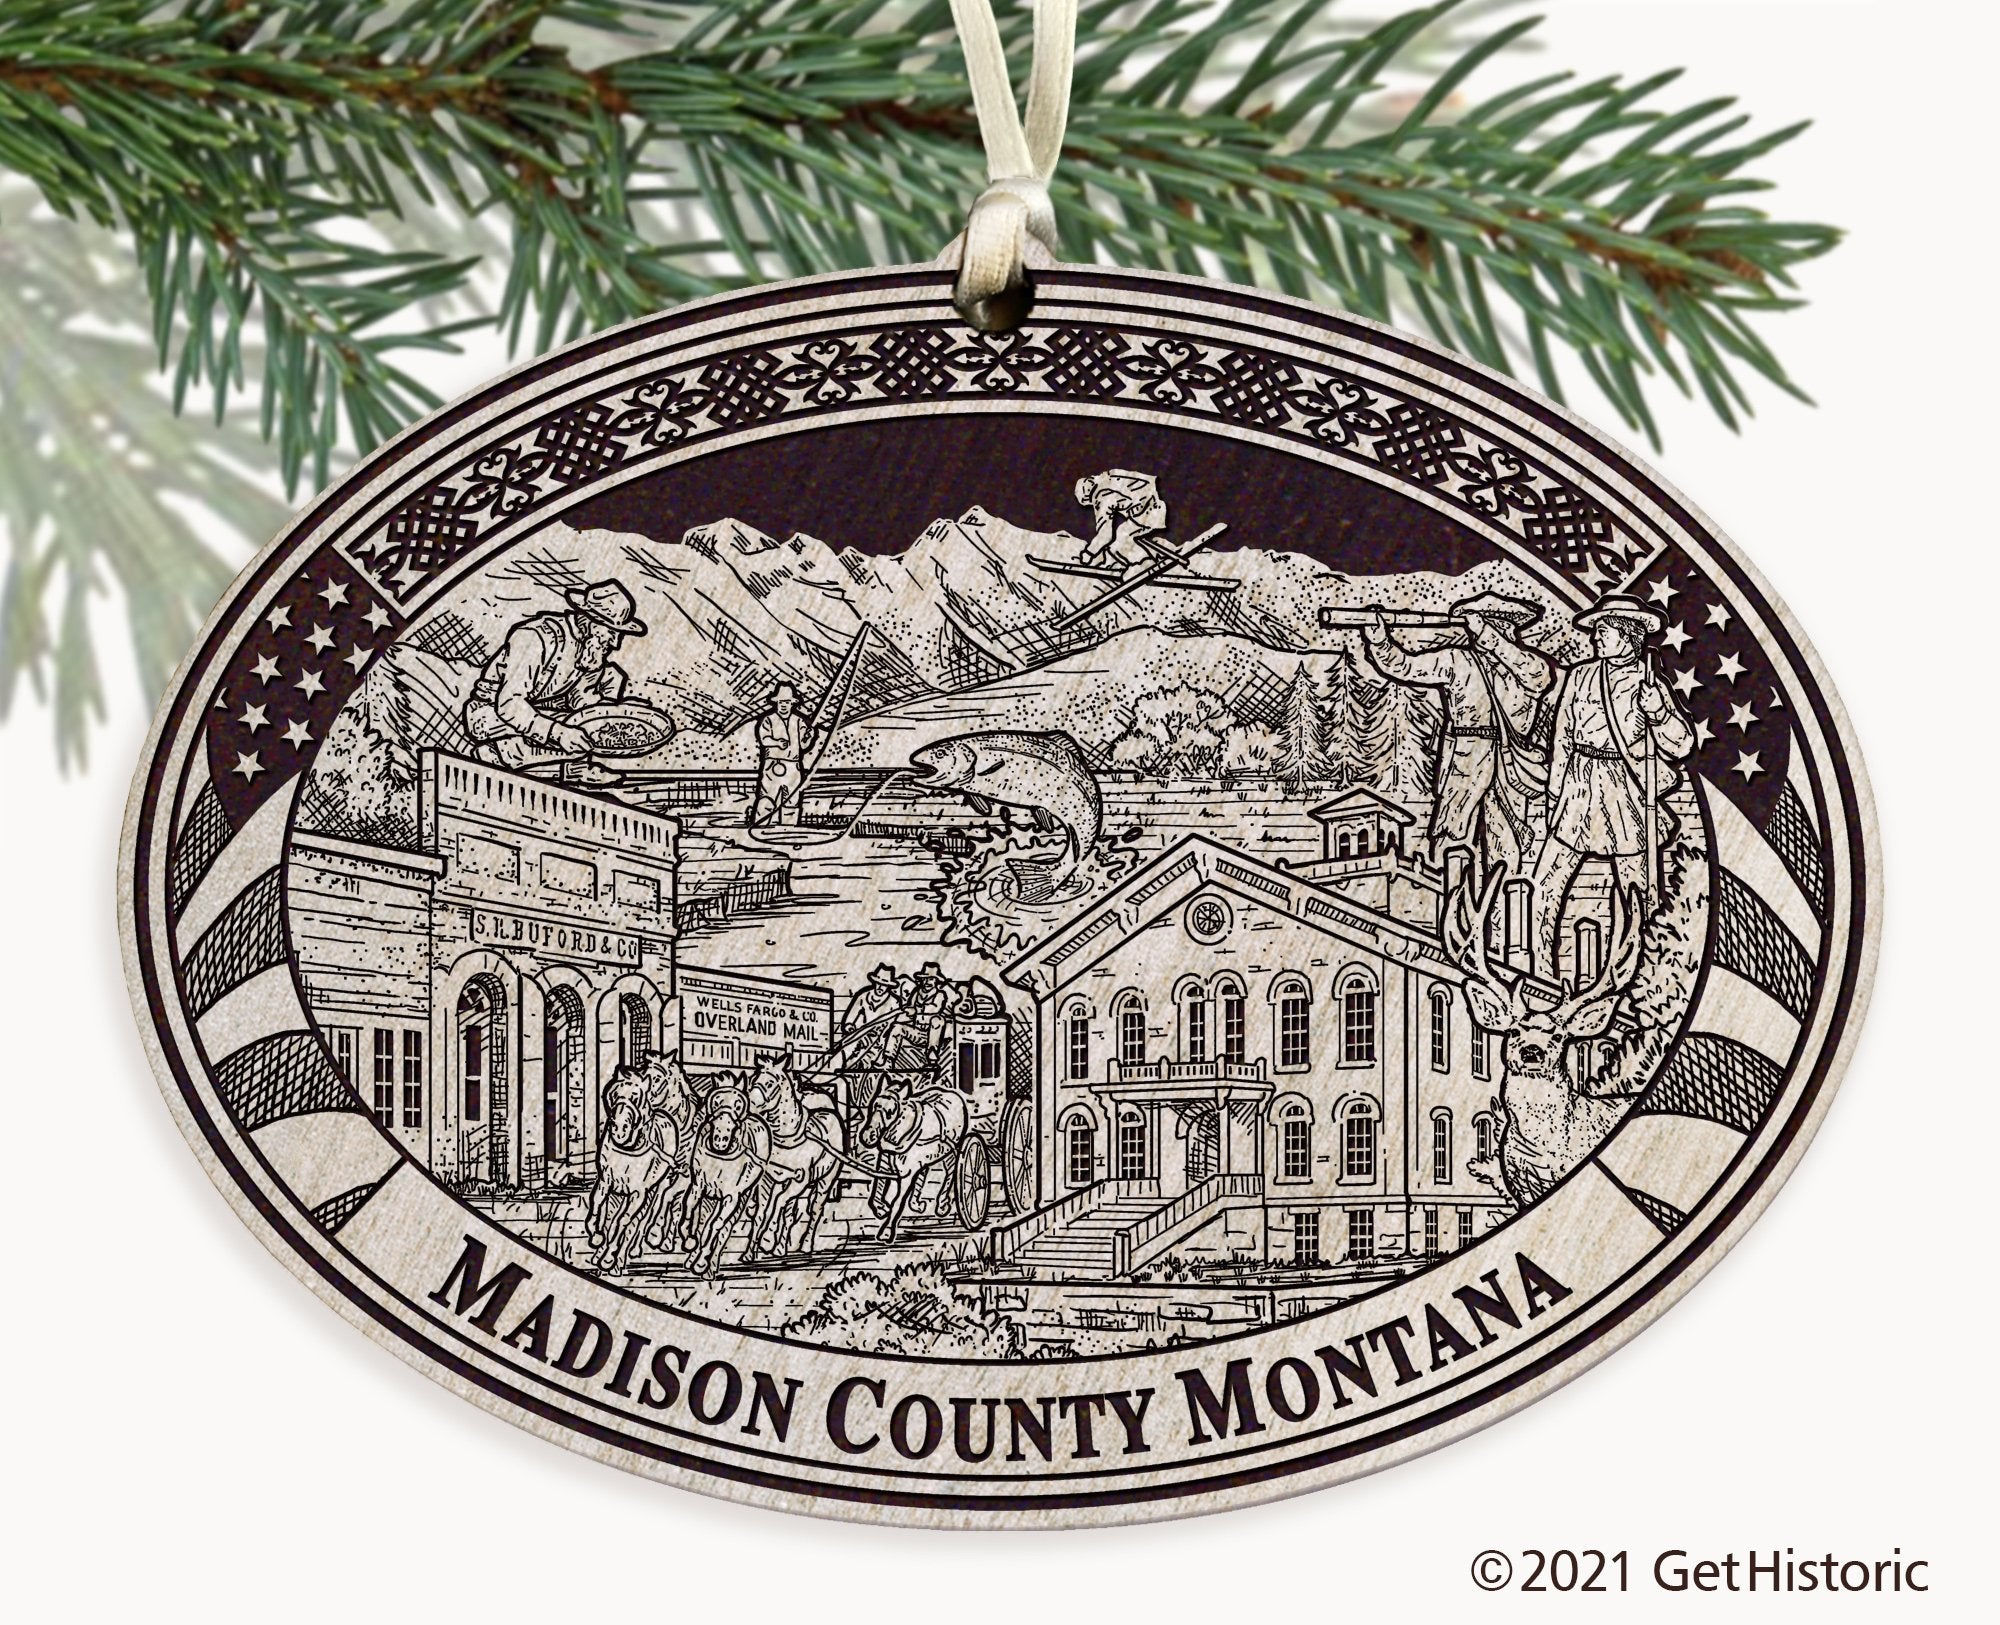 Madison County Montana Engraved Ornament